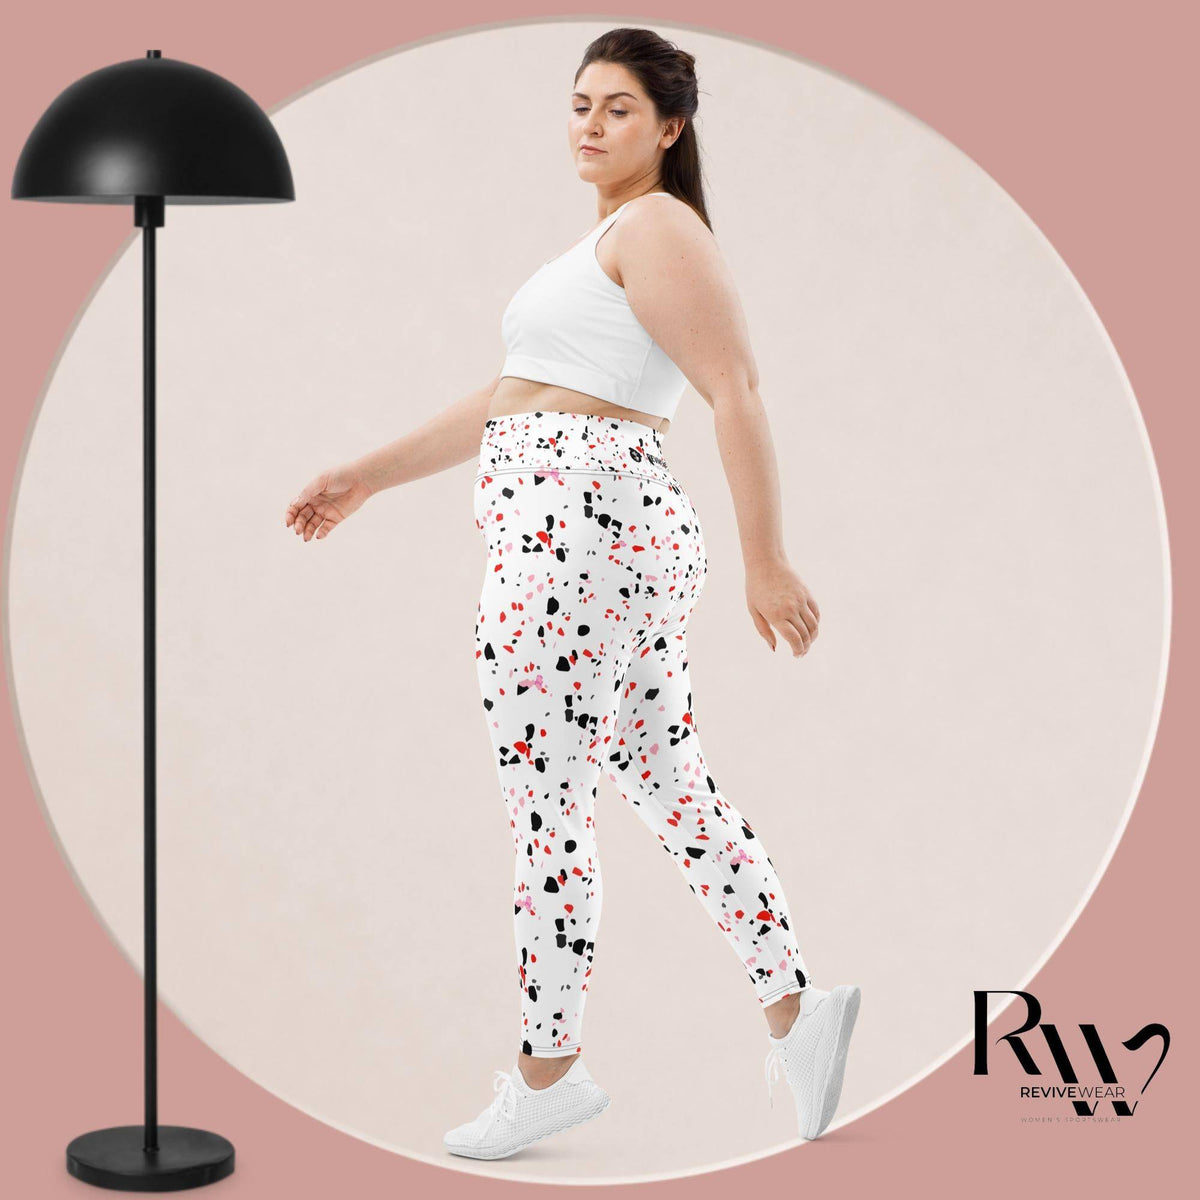 Radiant Leggings Plus Size High Waist Leggings - Revive Wear     Radiant Leggings Plus Size.  30-day returns. Supportive and flattering feel. Order now at Revive Wear.